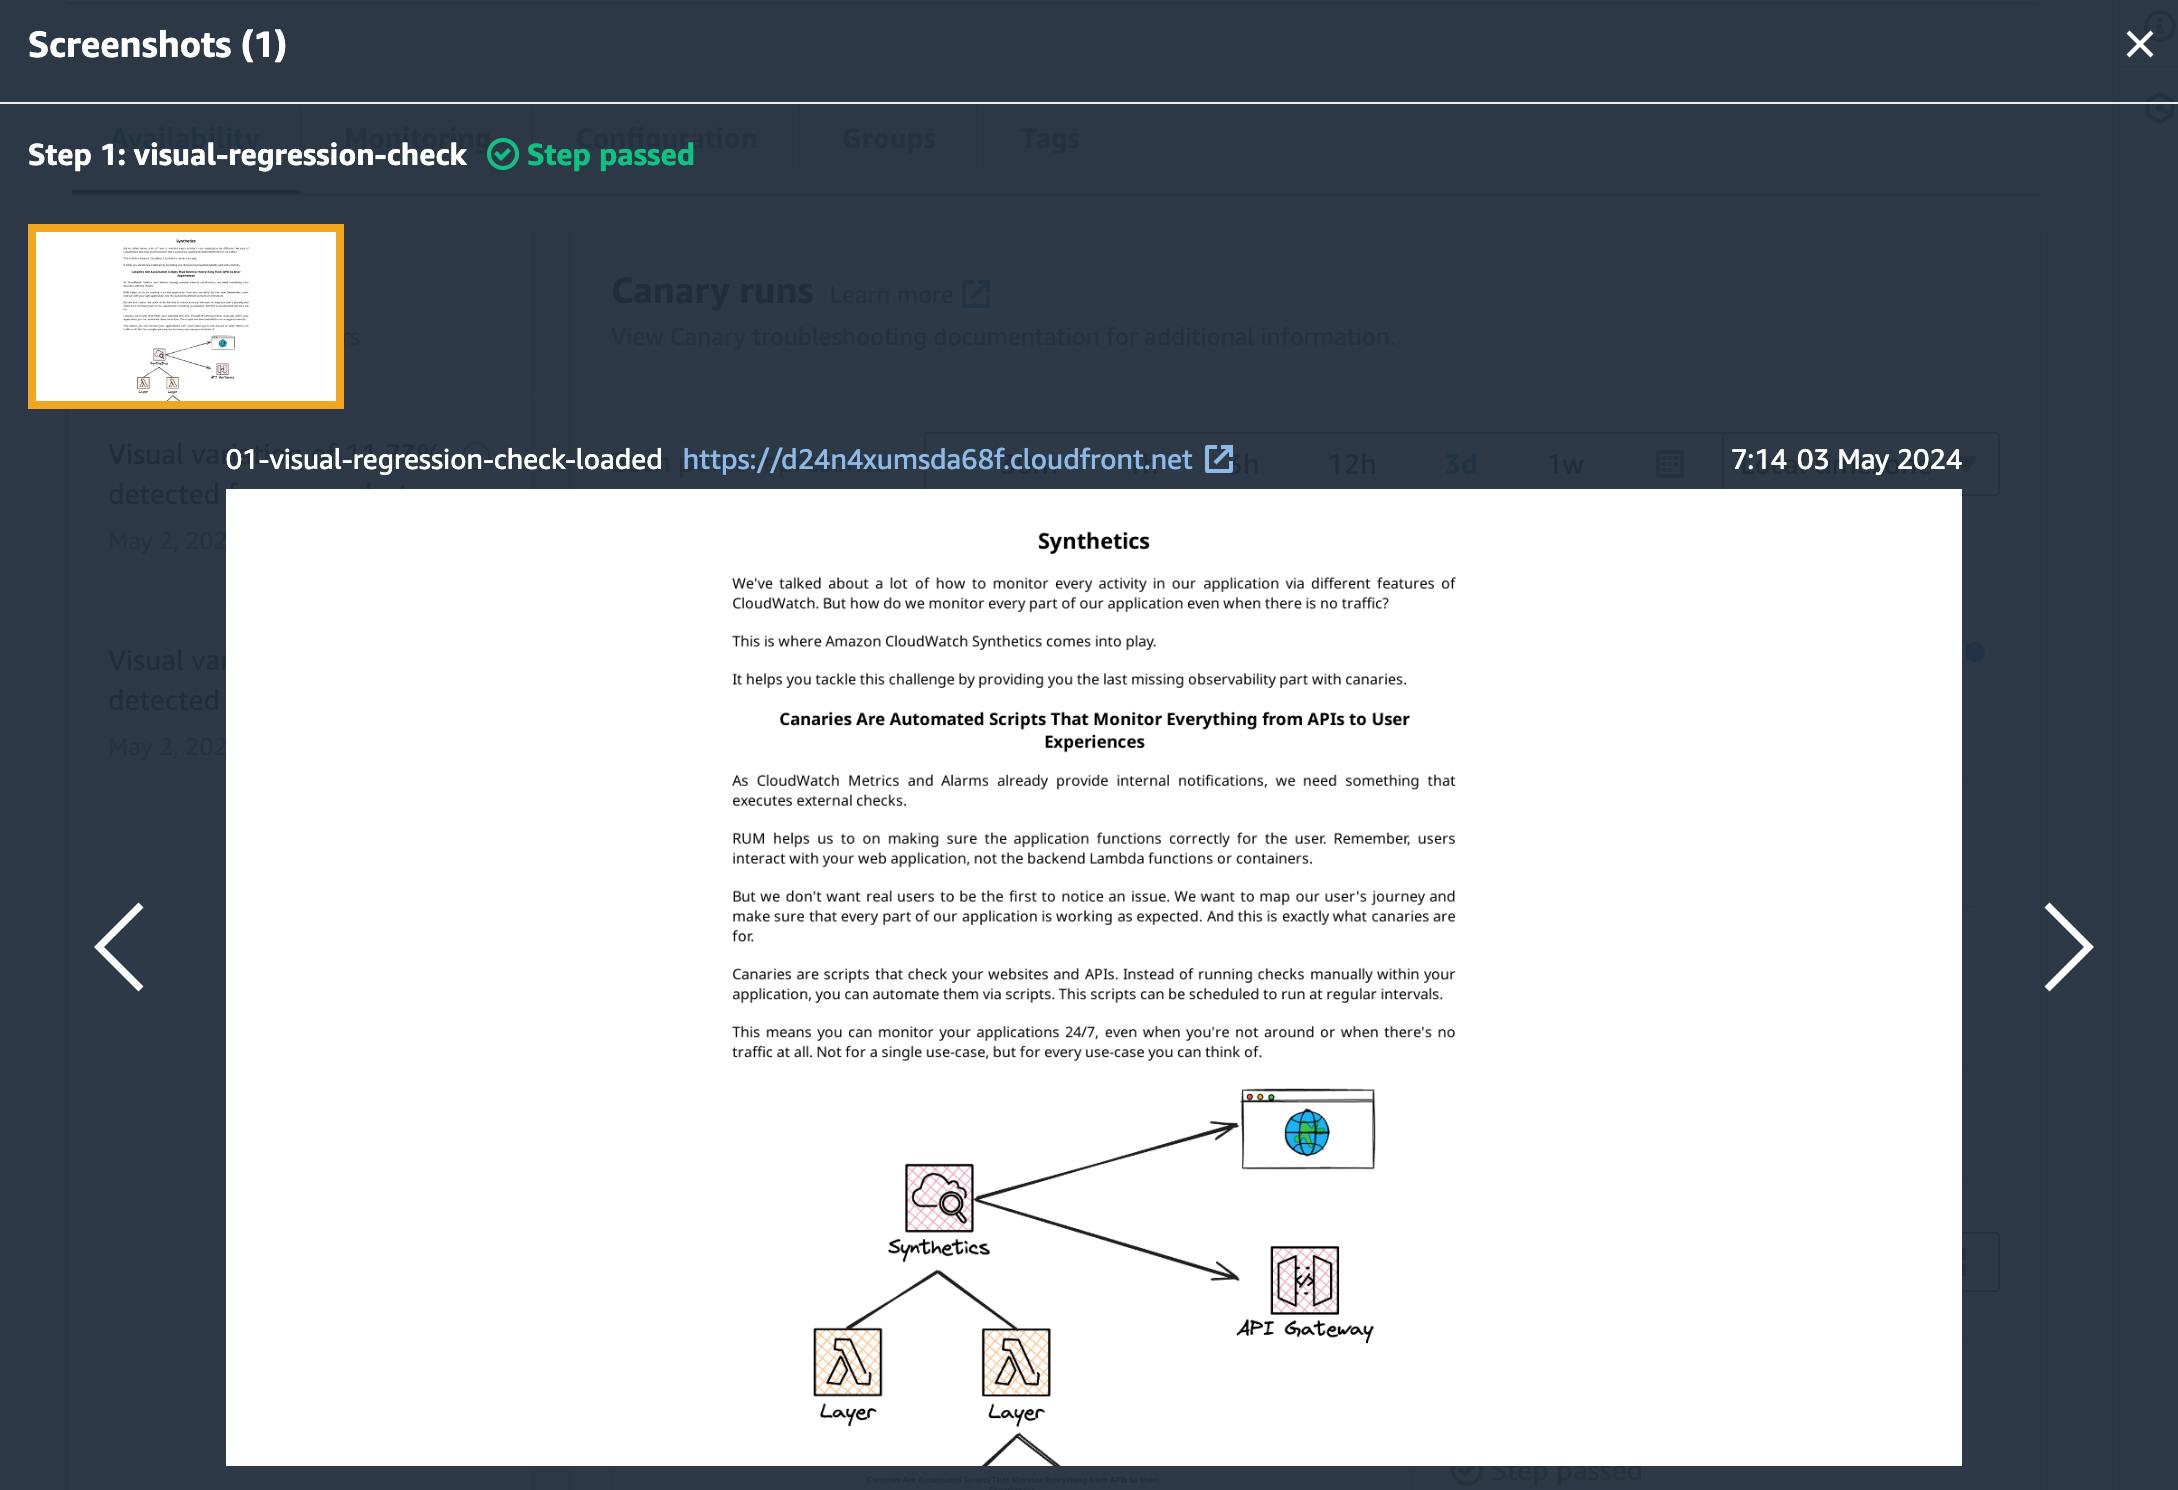 Screenshot of a webpage discussing "Canaries" as automated scripts in cloud monitoring, with a diagram explaining the process and a navigation bar showing a "Step passed" notification for a visual regression check.